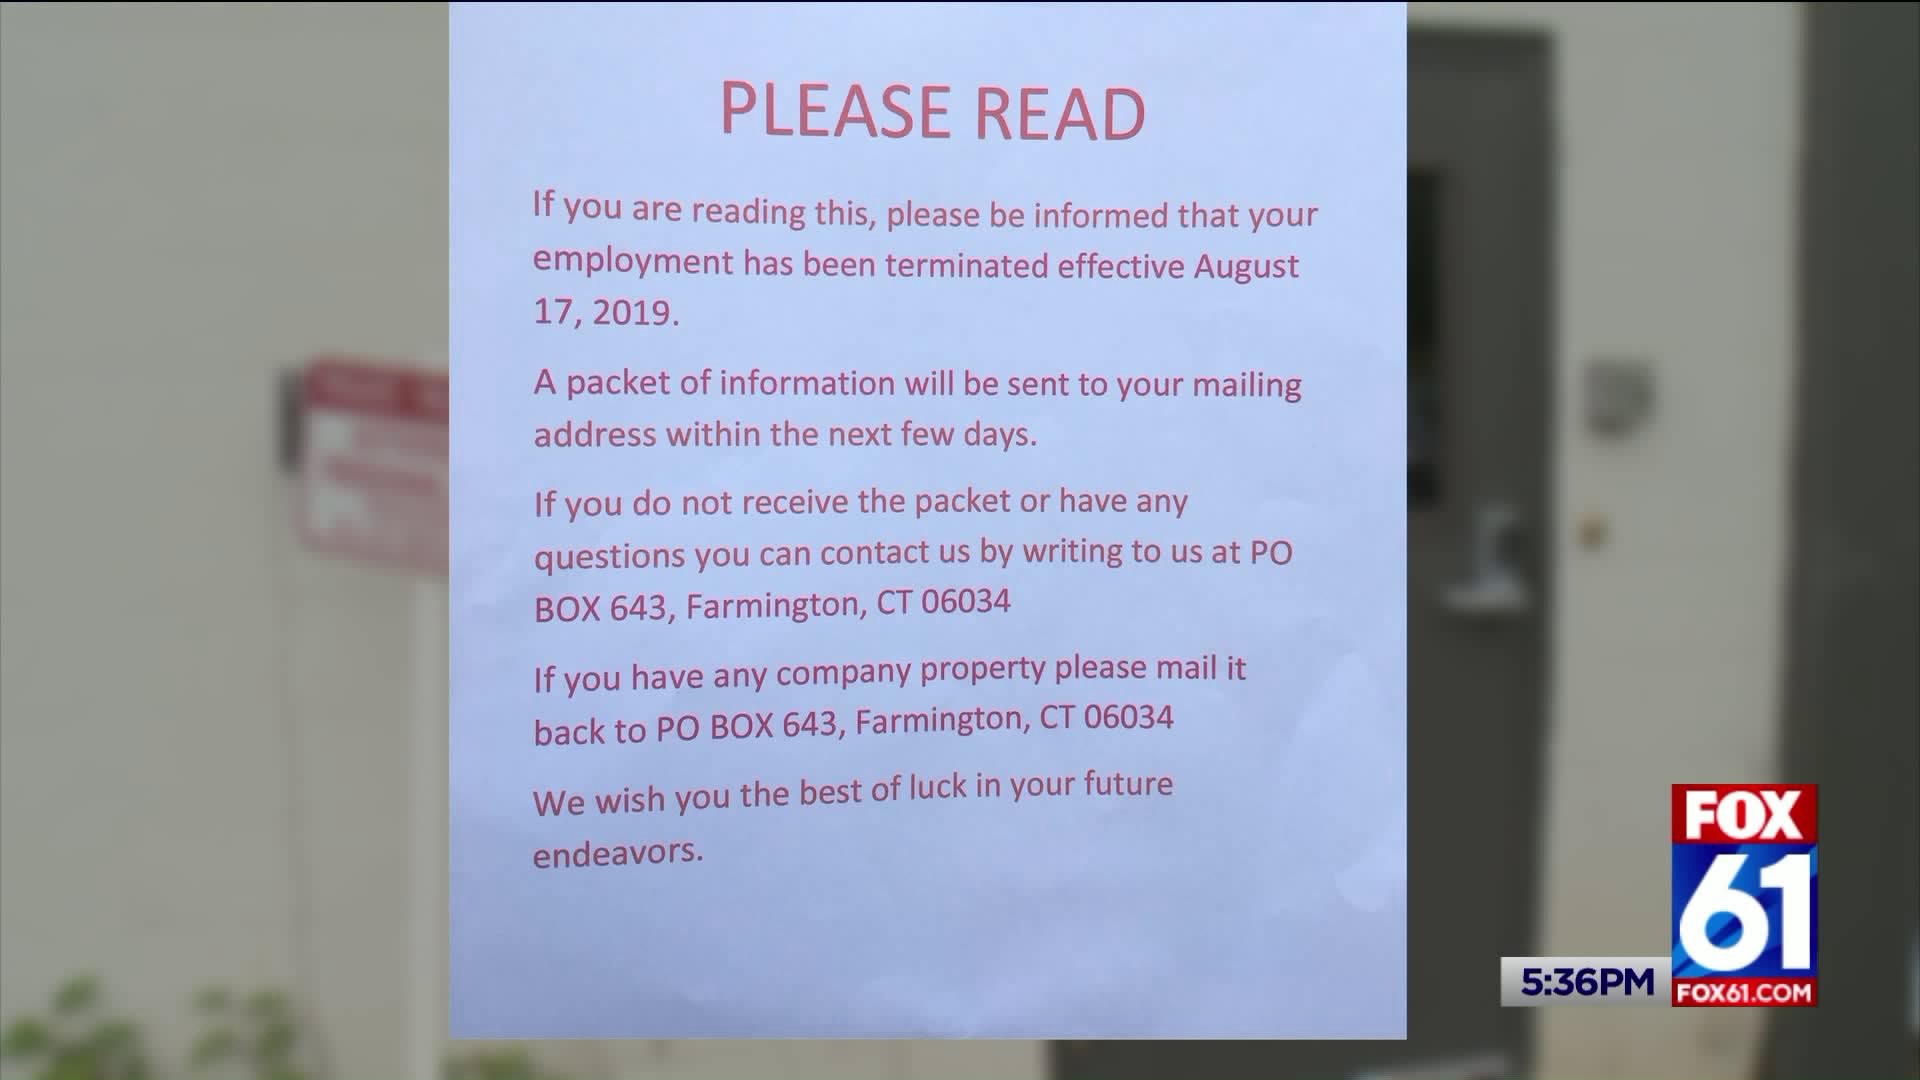 Class action lawsuit filed over Farmington company firing employees with a note on the door